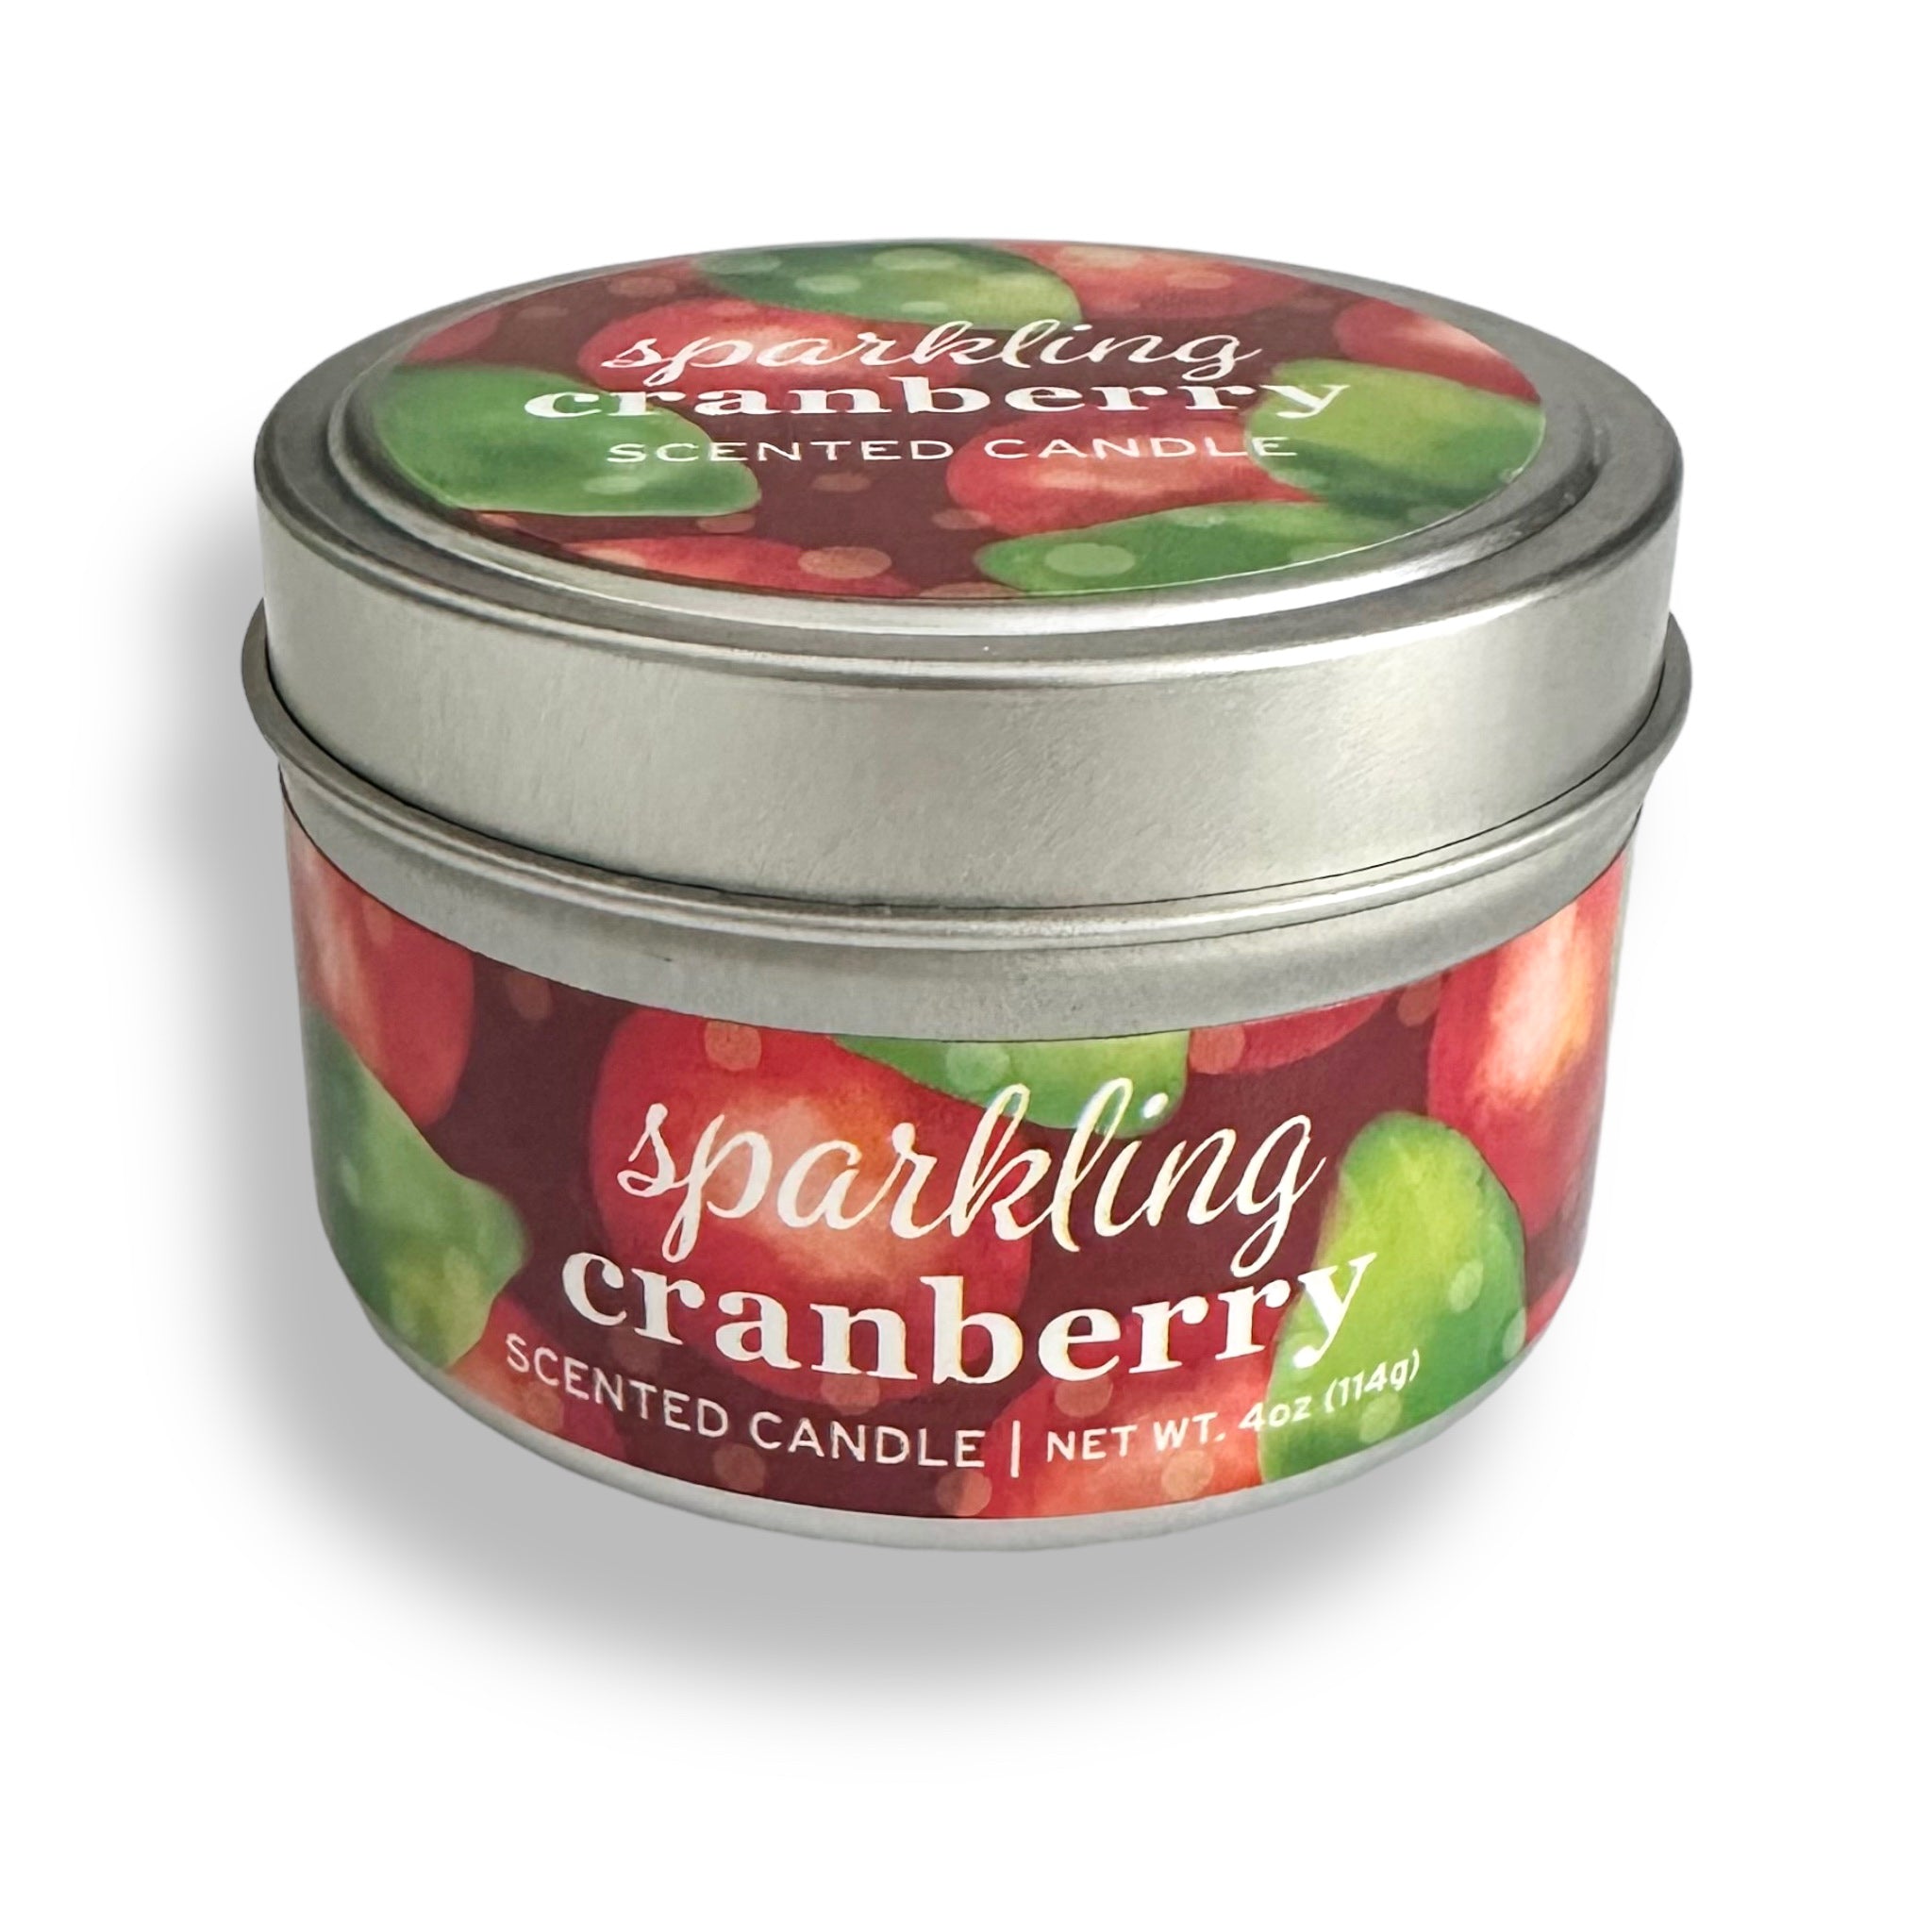 SPARKLING CRANBERRY Candle